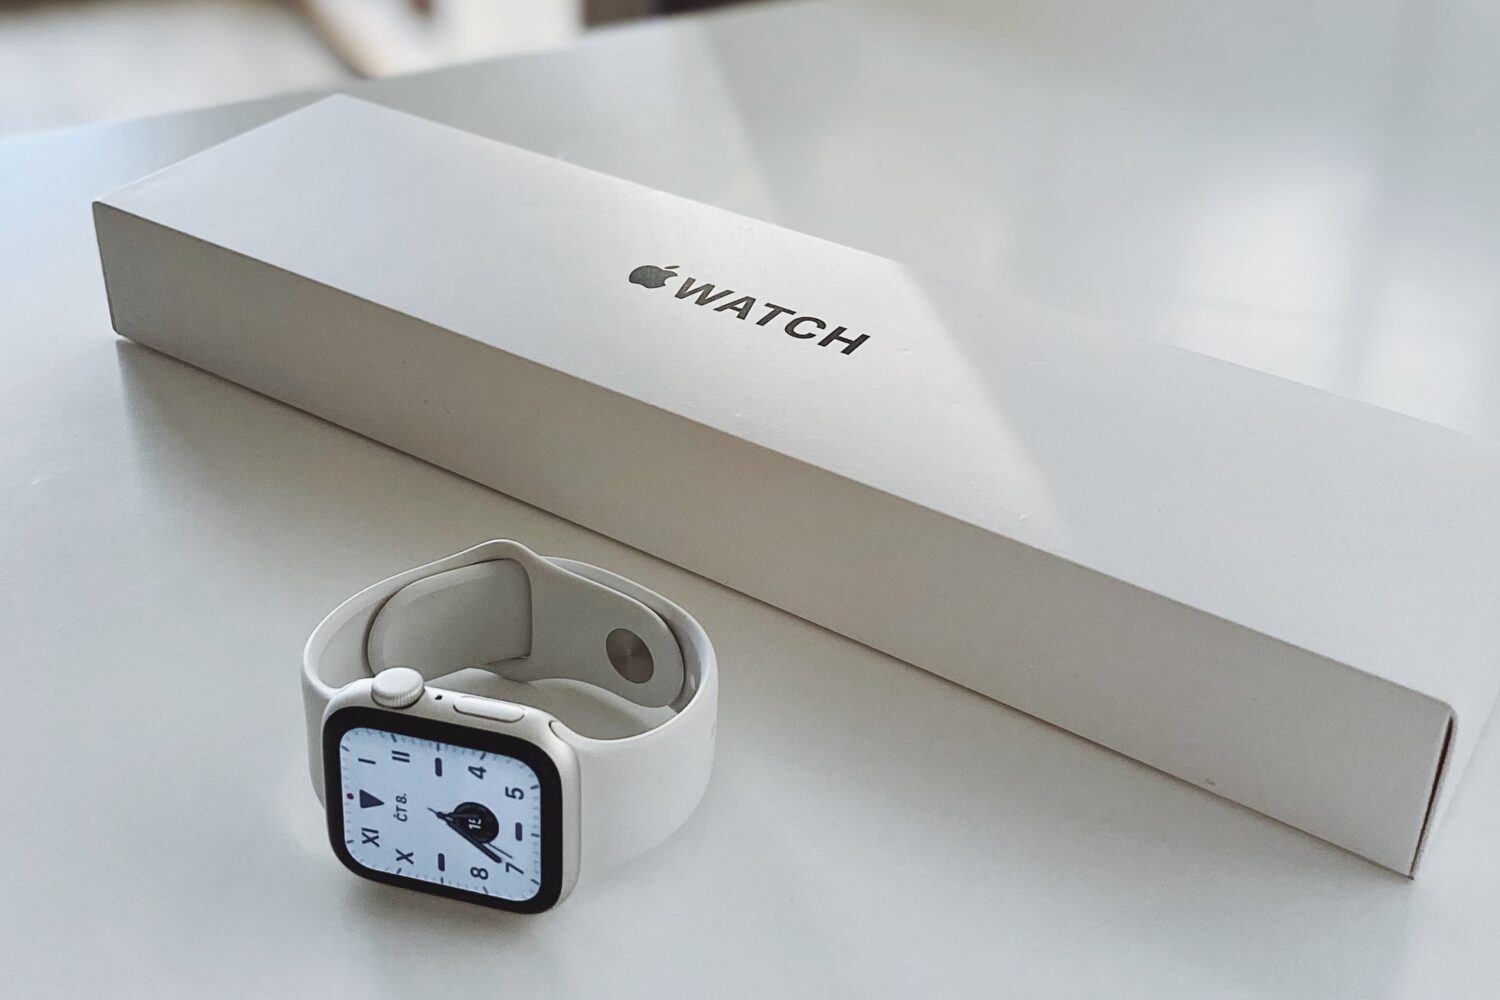 Apple Watch Series 7 rating on its side on a white table alongside its packaging